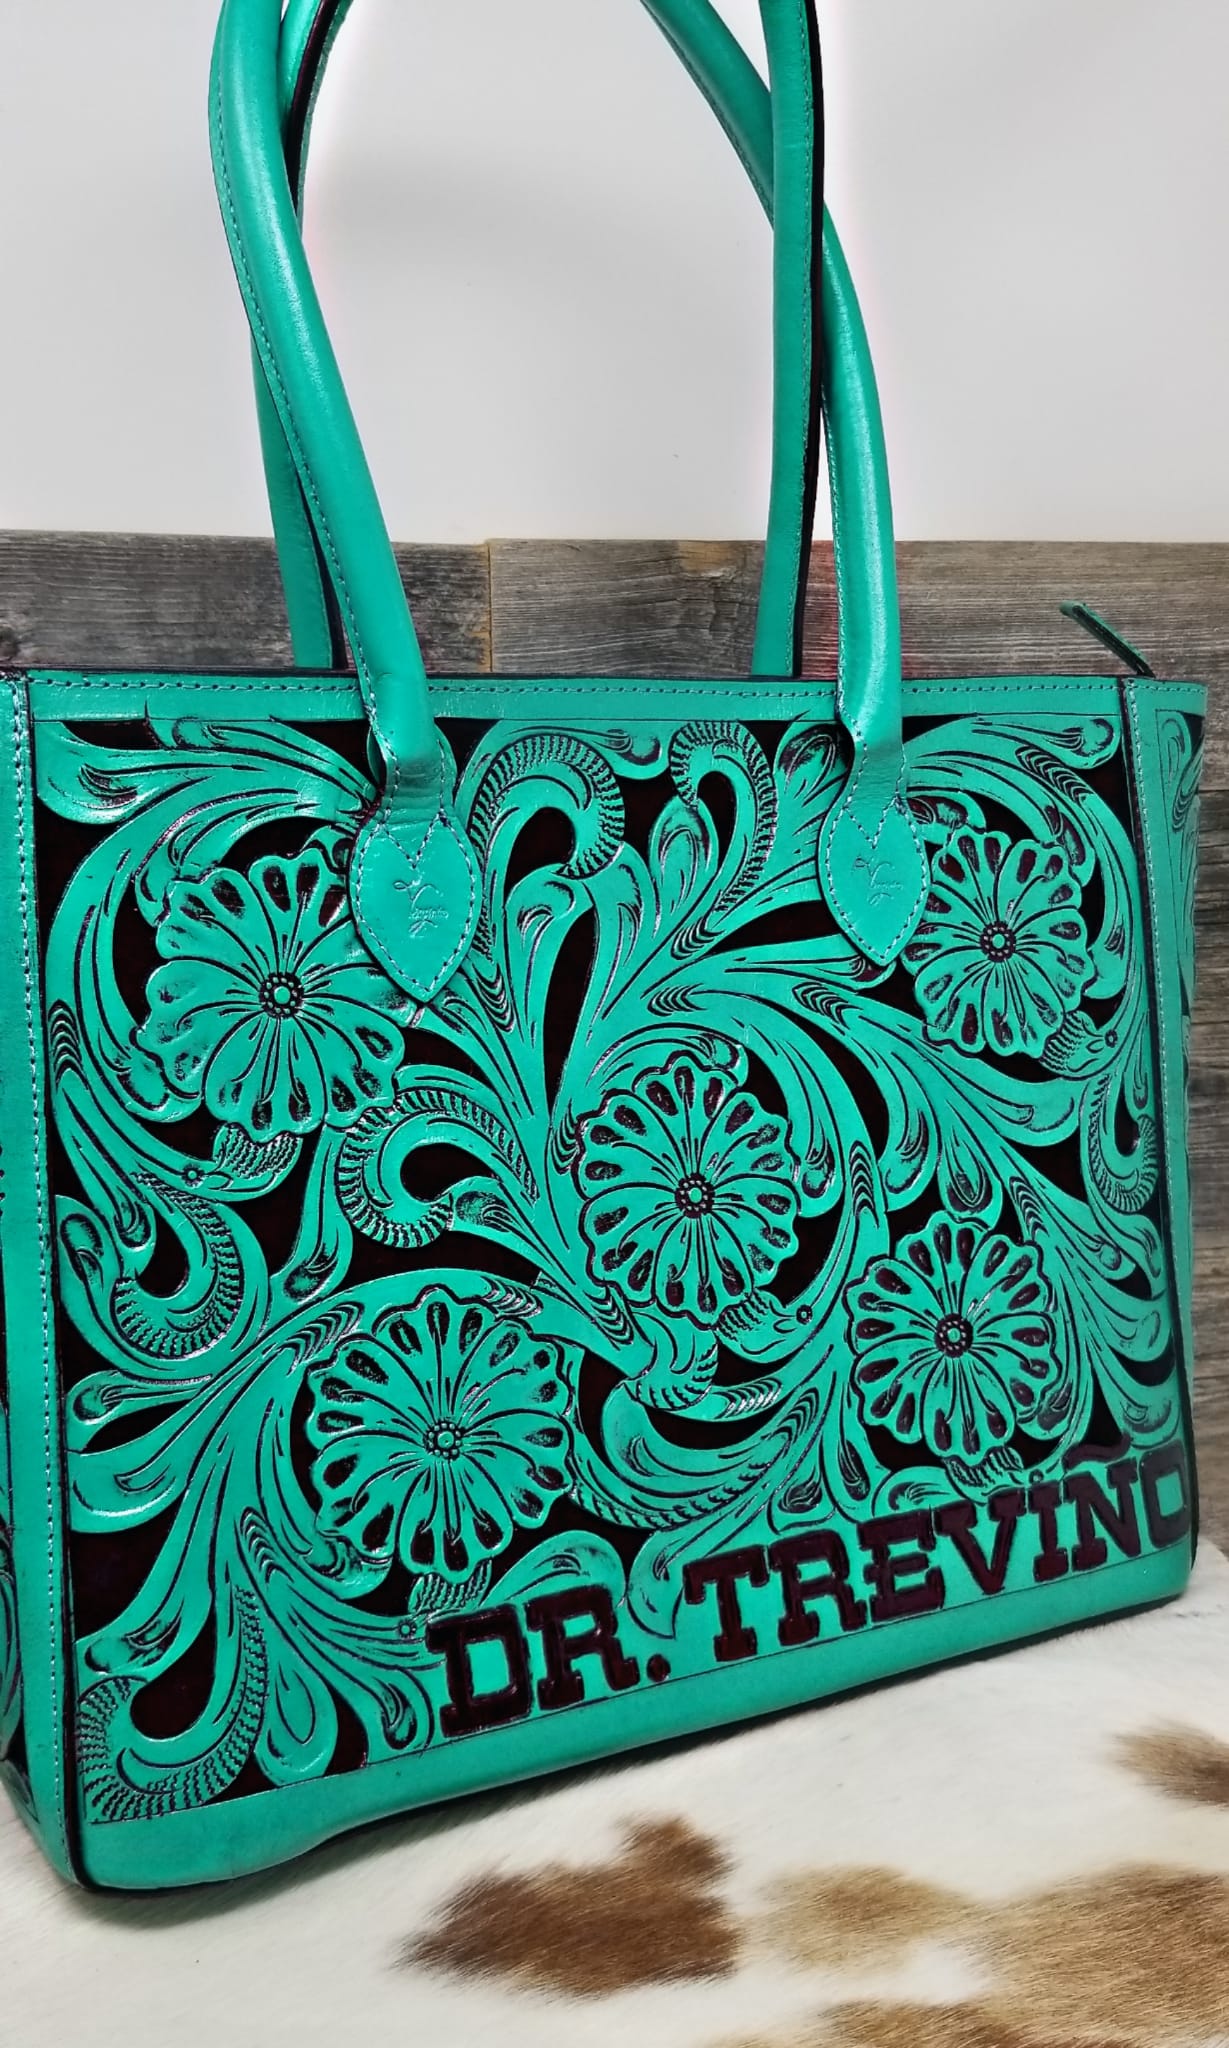 turquoise, lv fashion, leather handbag - clothing & accessories - by owner  - apparel sale - craigslist